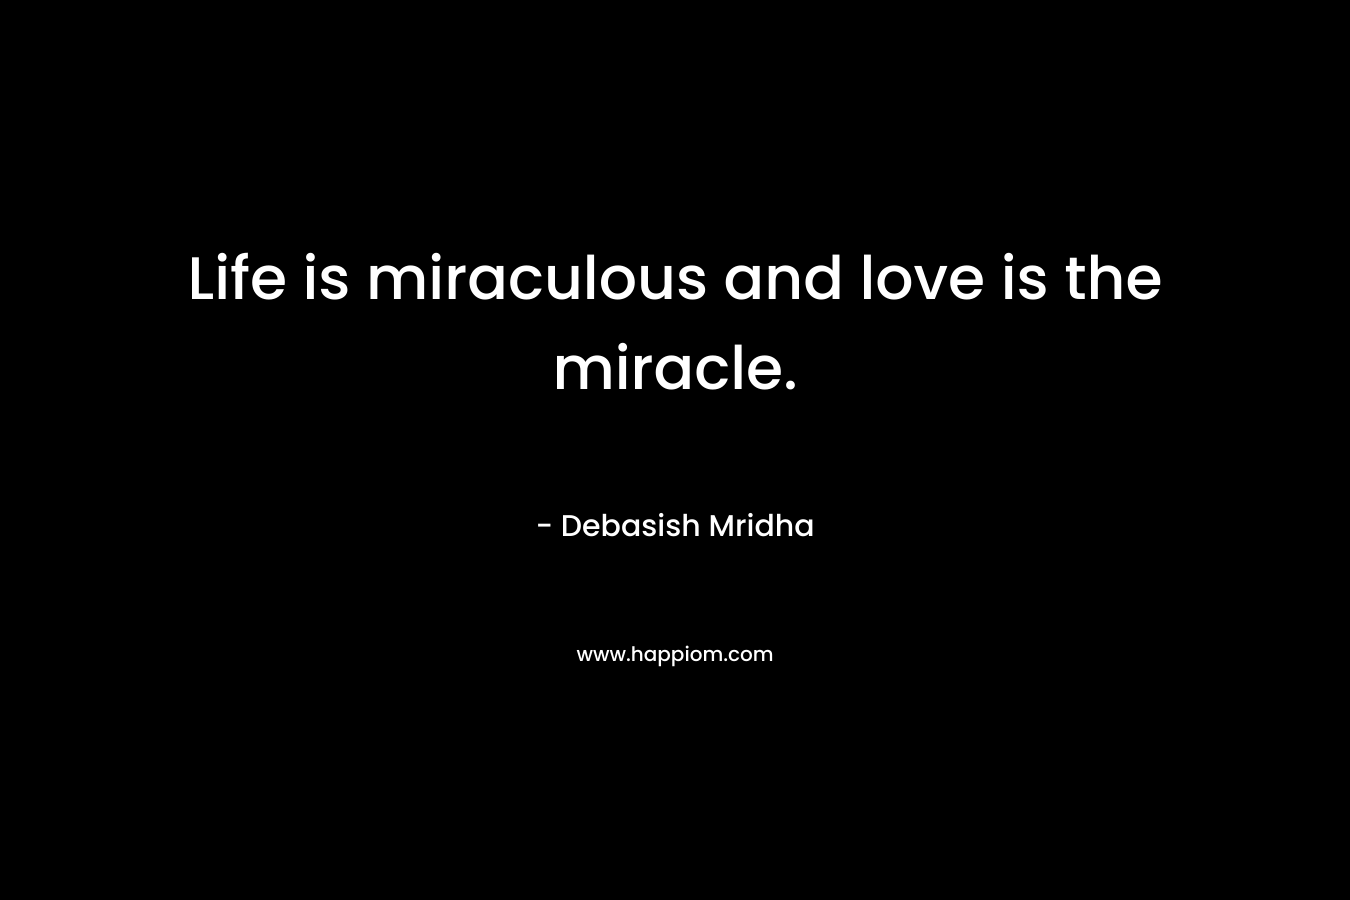 Life is miraculous and love is the miracle.